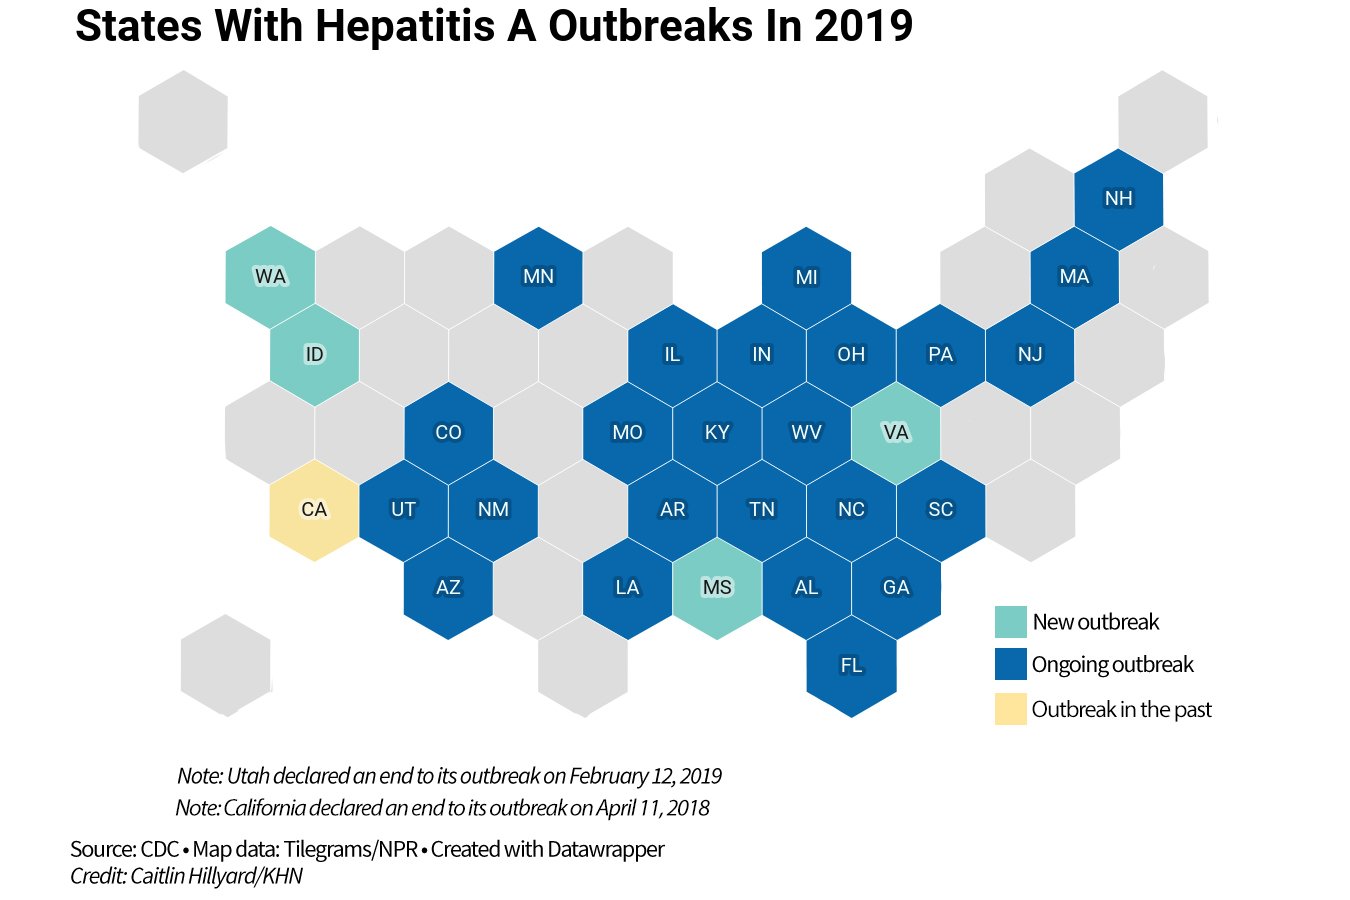 States with Hepatitis A Outbreaks in 2019